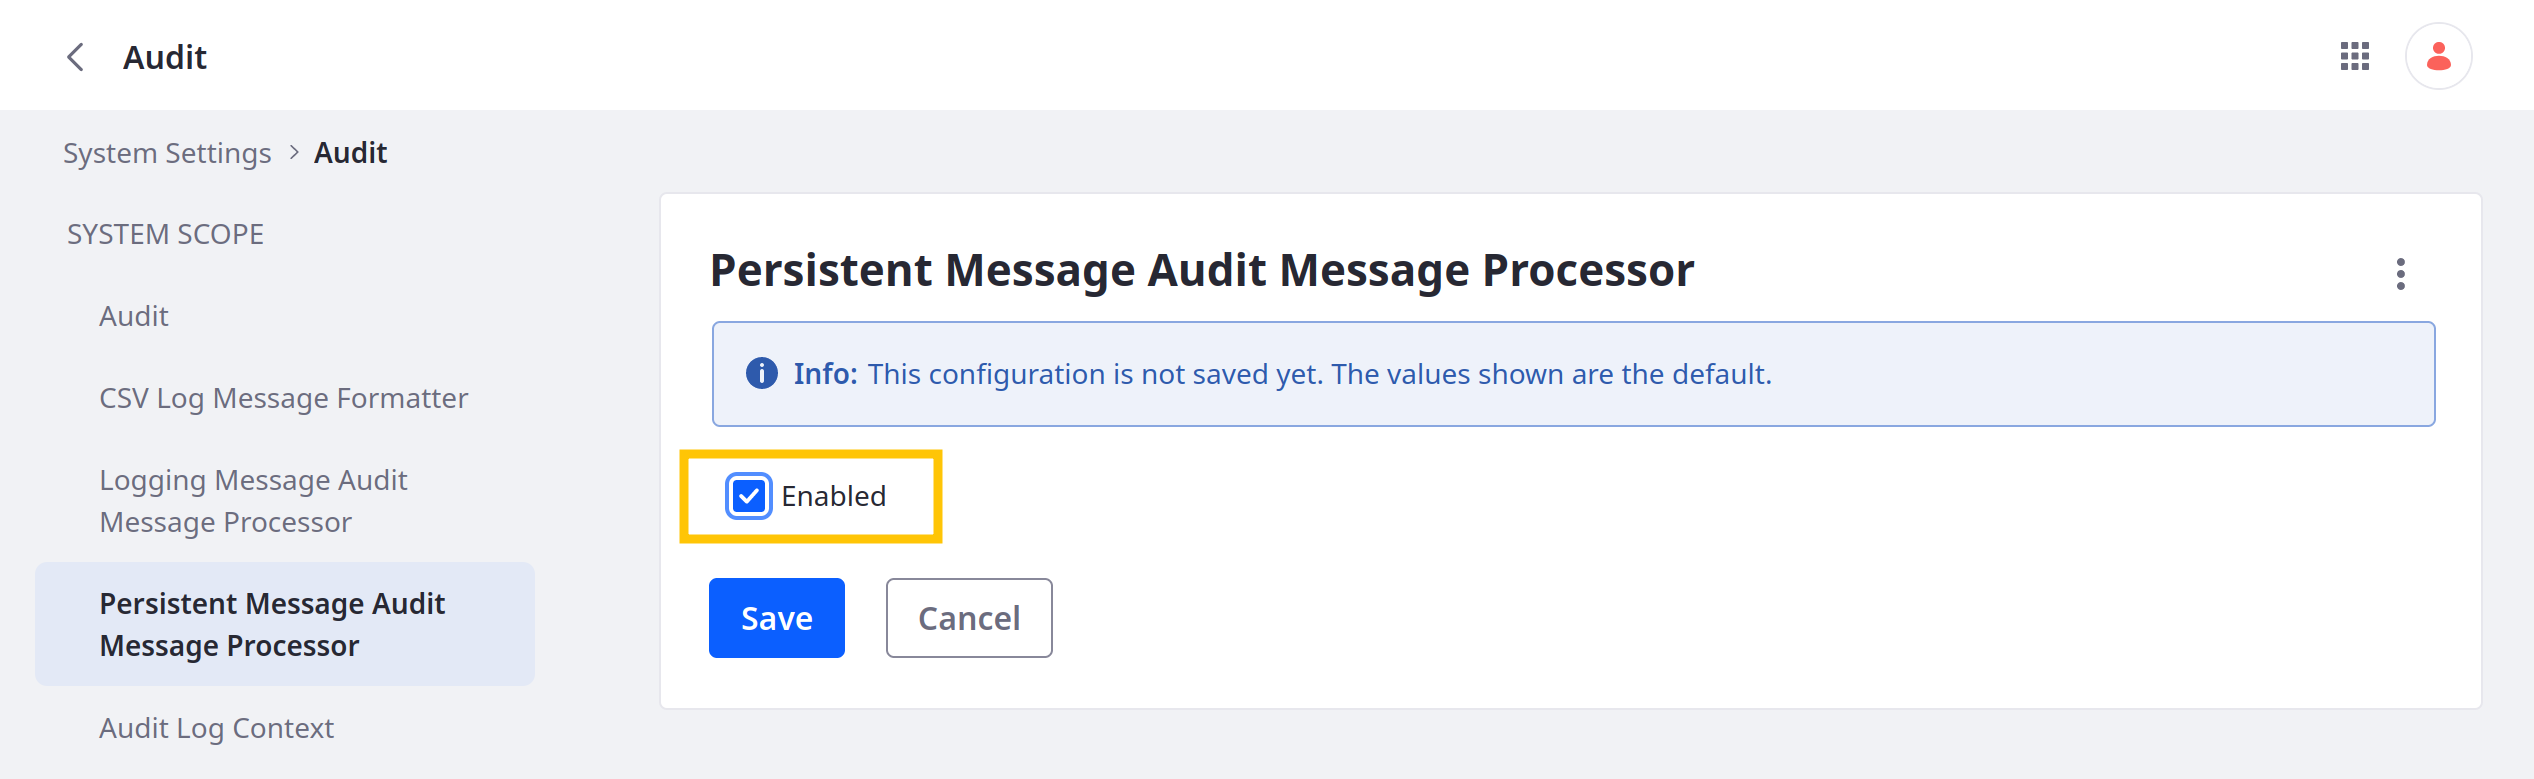 Go to the Persistent Message Audit Message Processor tab and check Enabled.